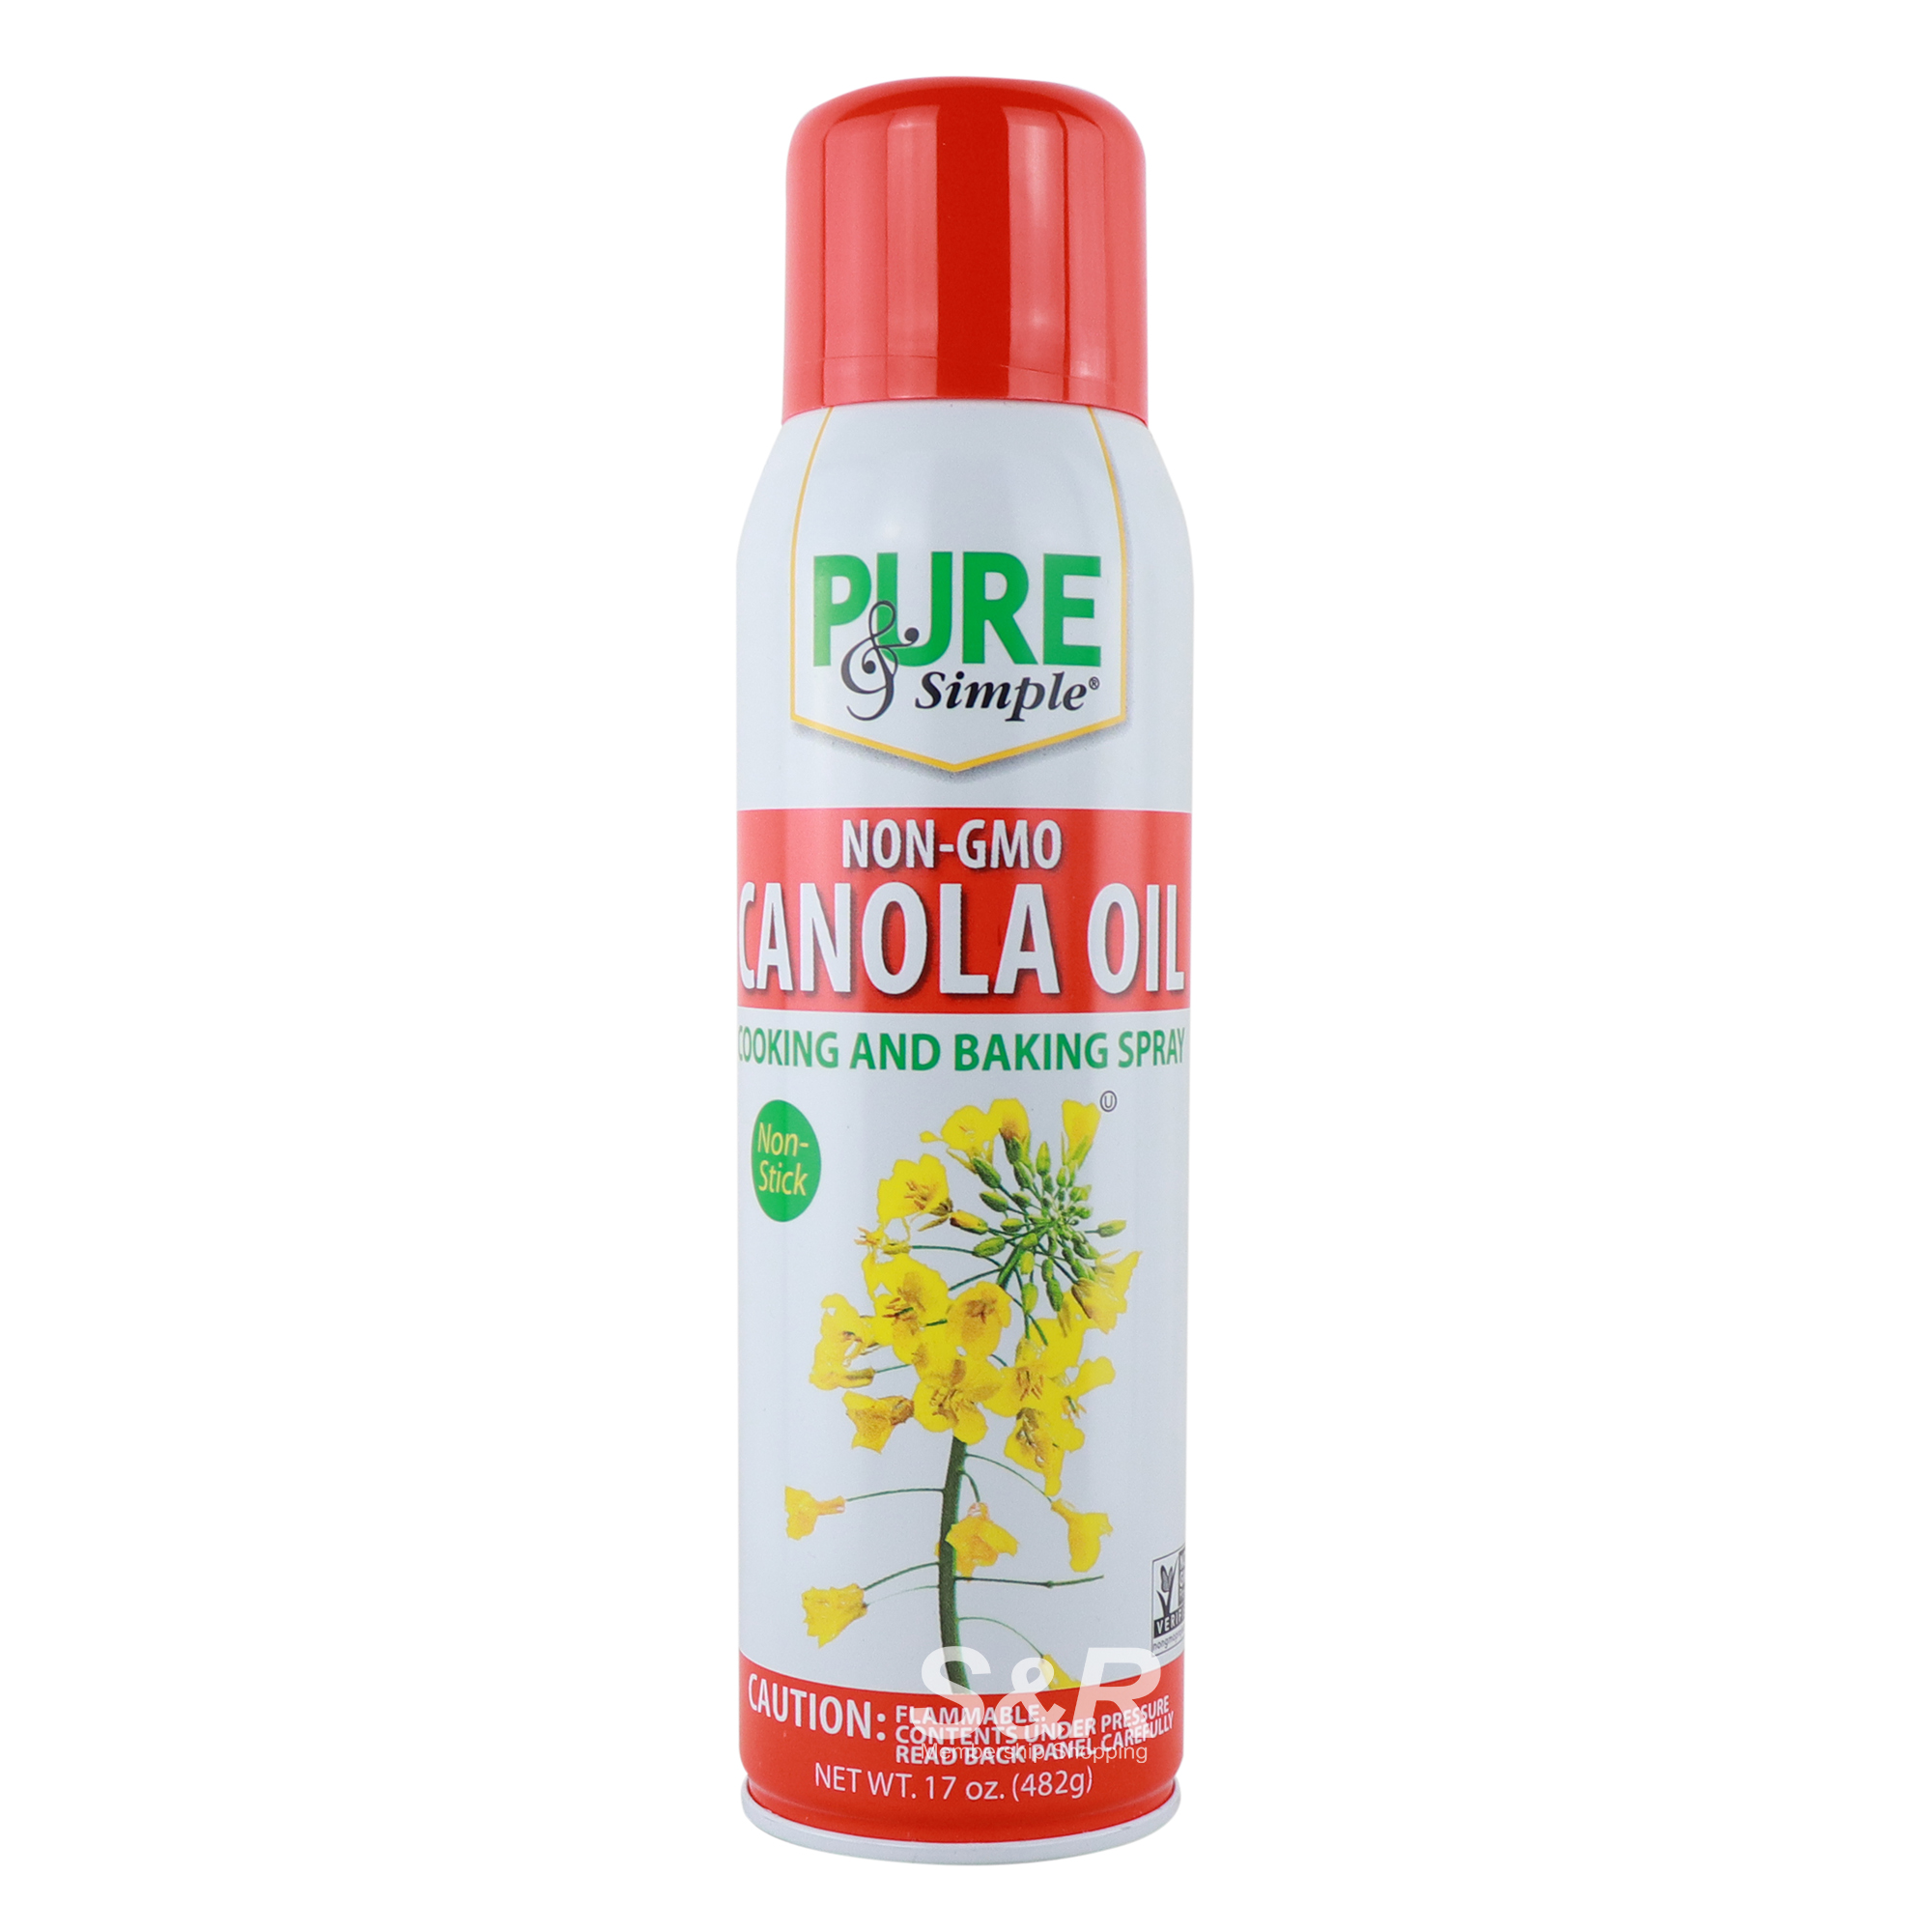 Pure & Simple Canola Oil Cooking and Baking Spray 482g